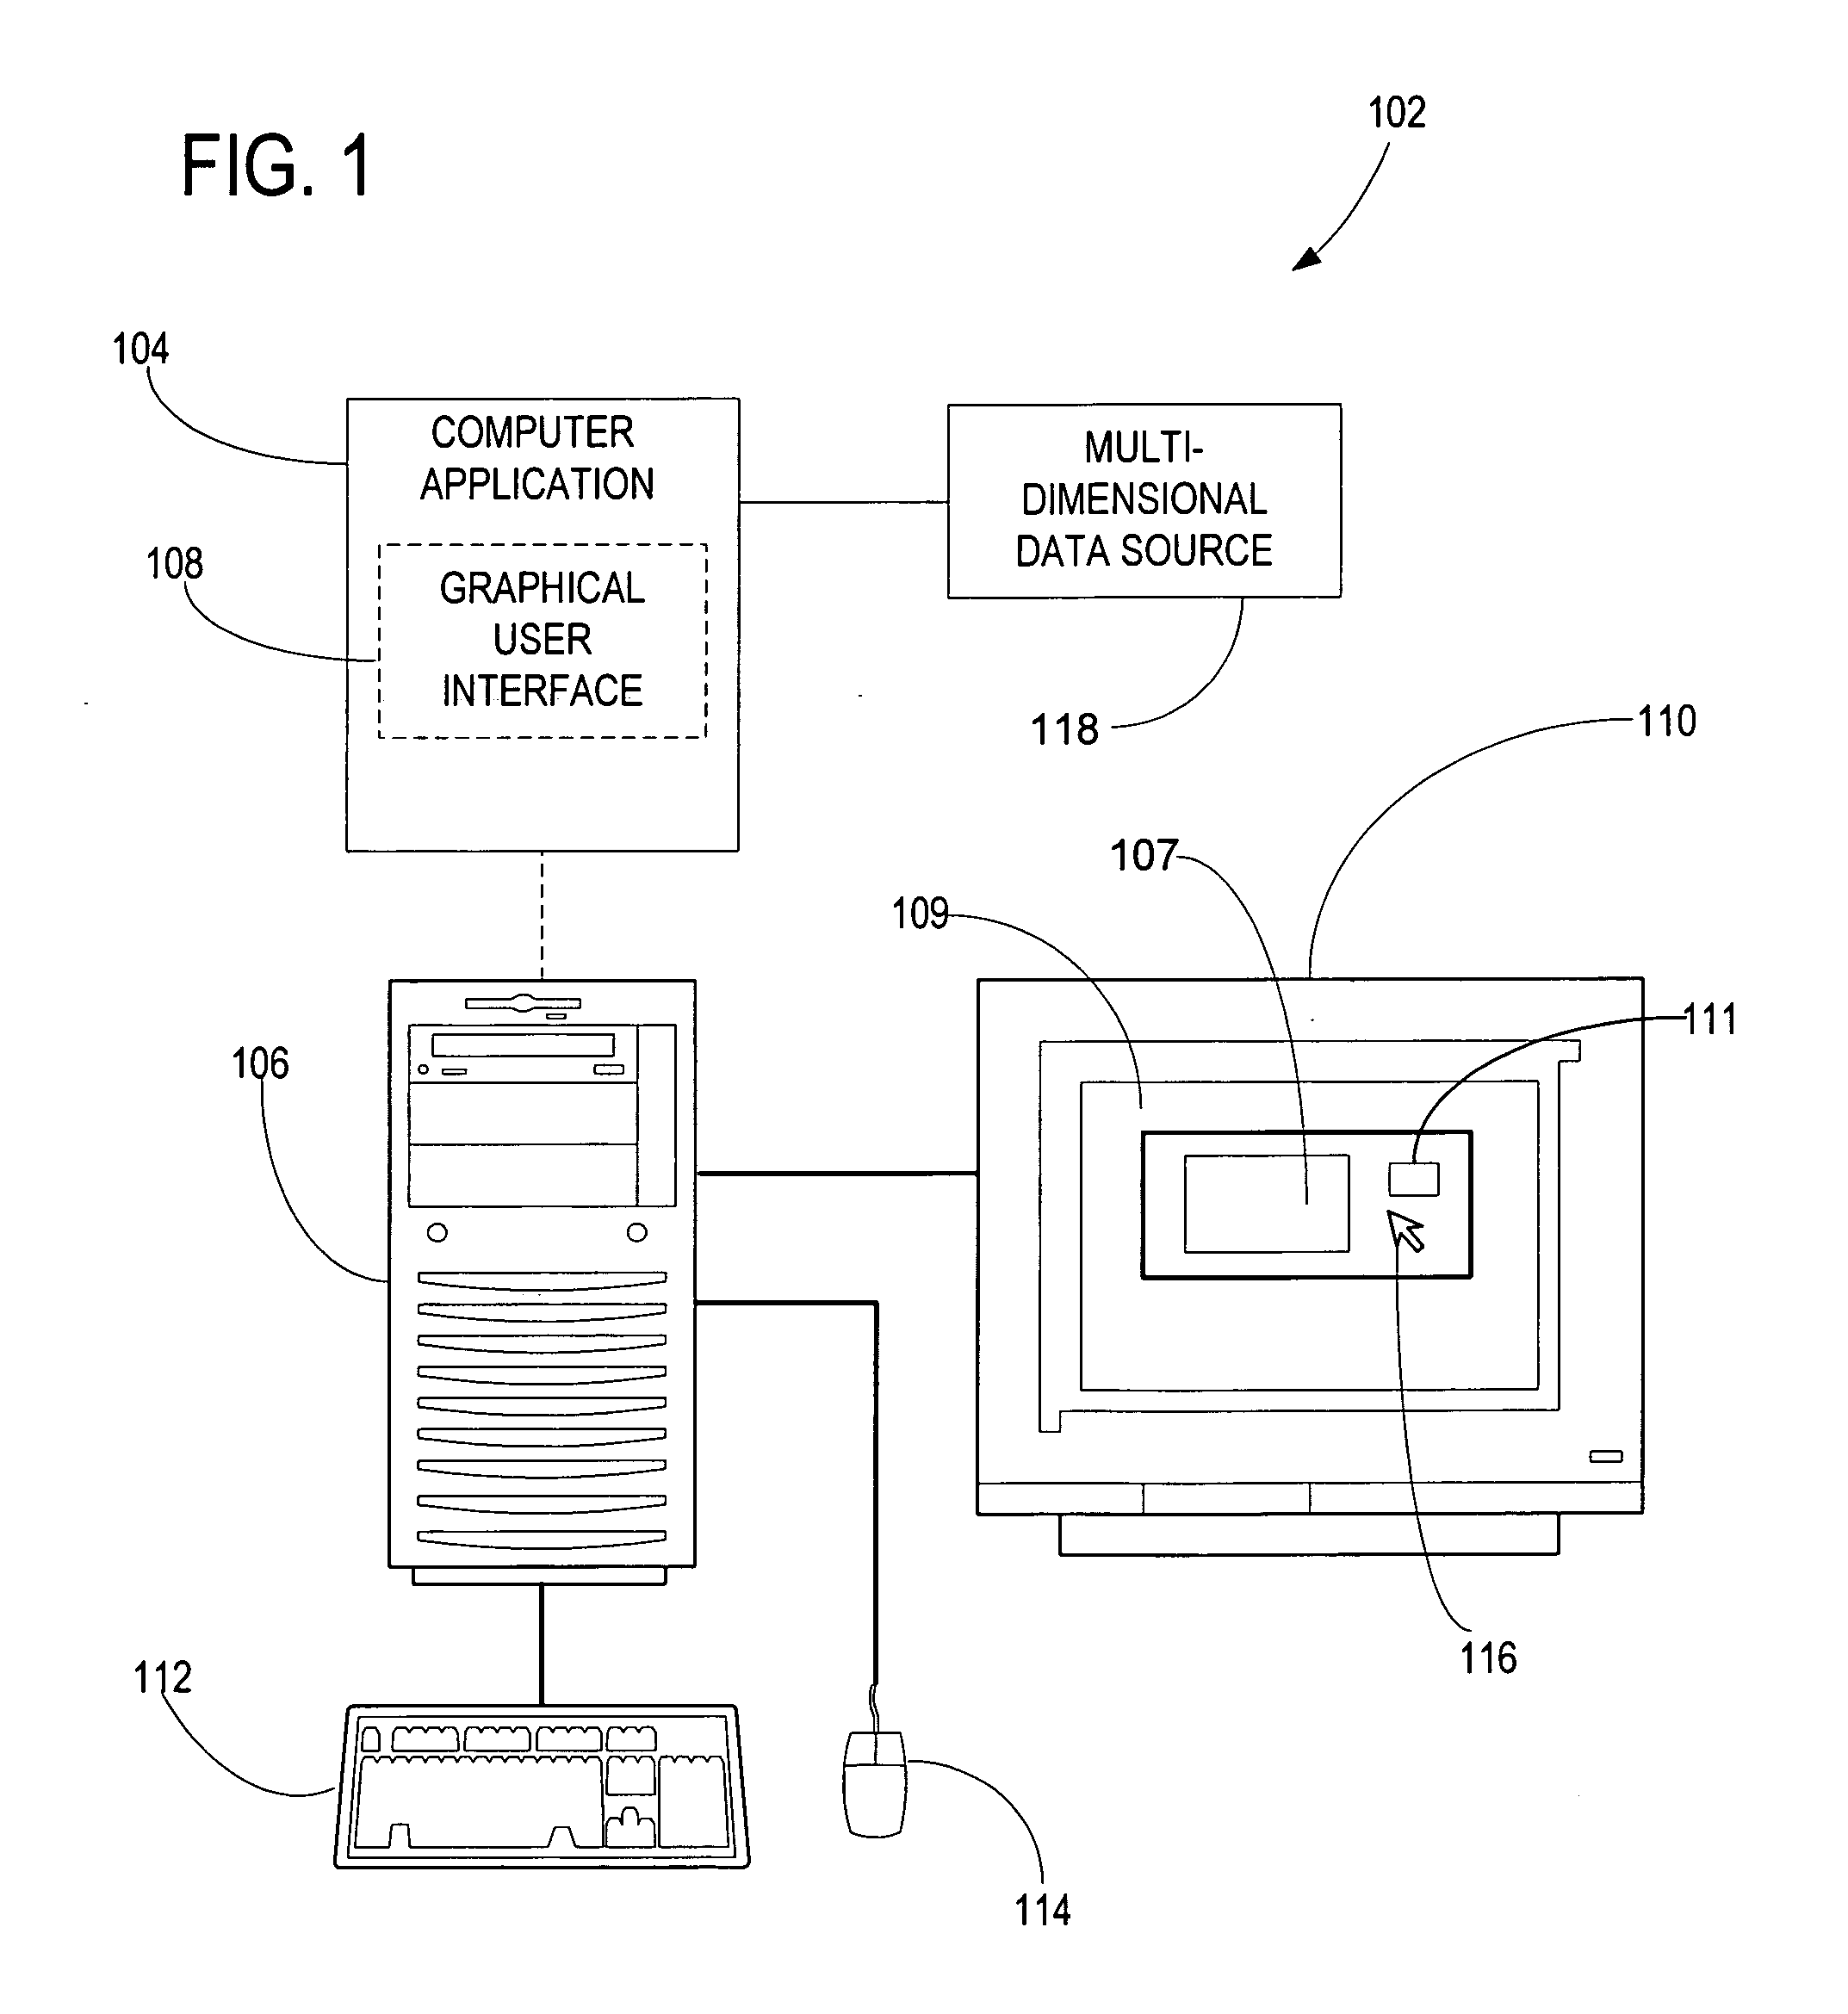 System and method for interactively displaying multi-dimensional data